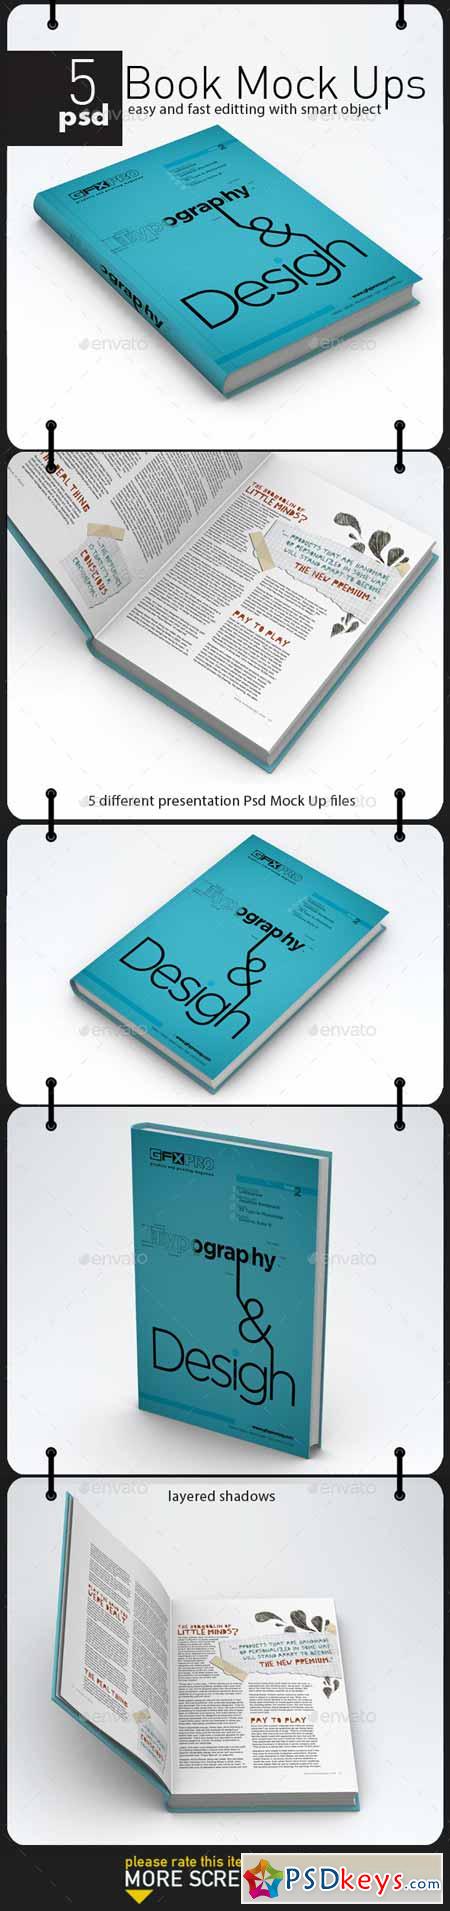 Download Book Page 17 Free Download Photoshop Vector Stock Image Via Torrent Zippyshare From Psdkeys Com PSD Mockup Templates